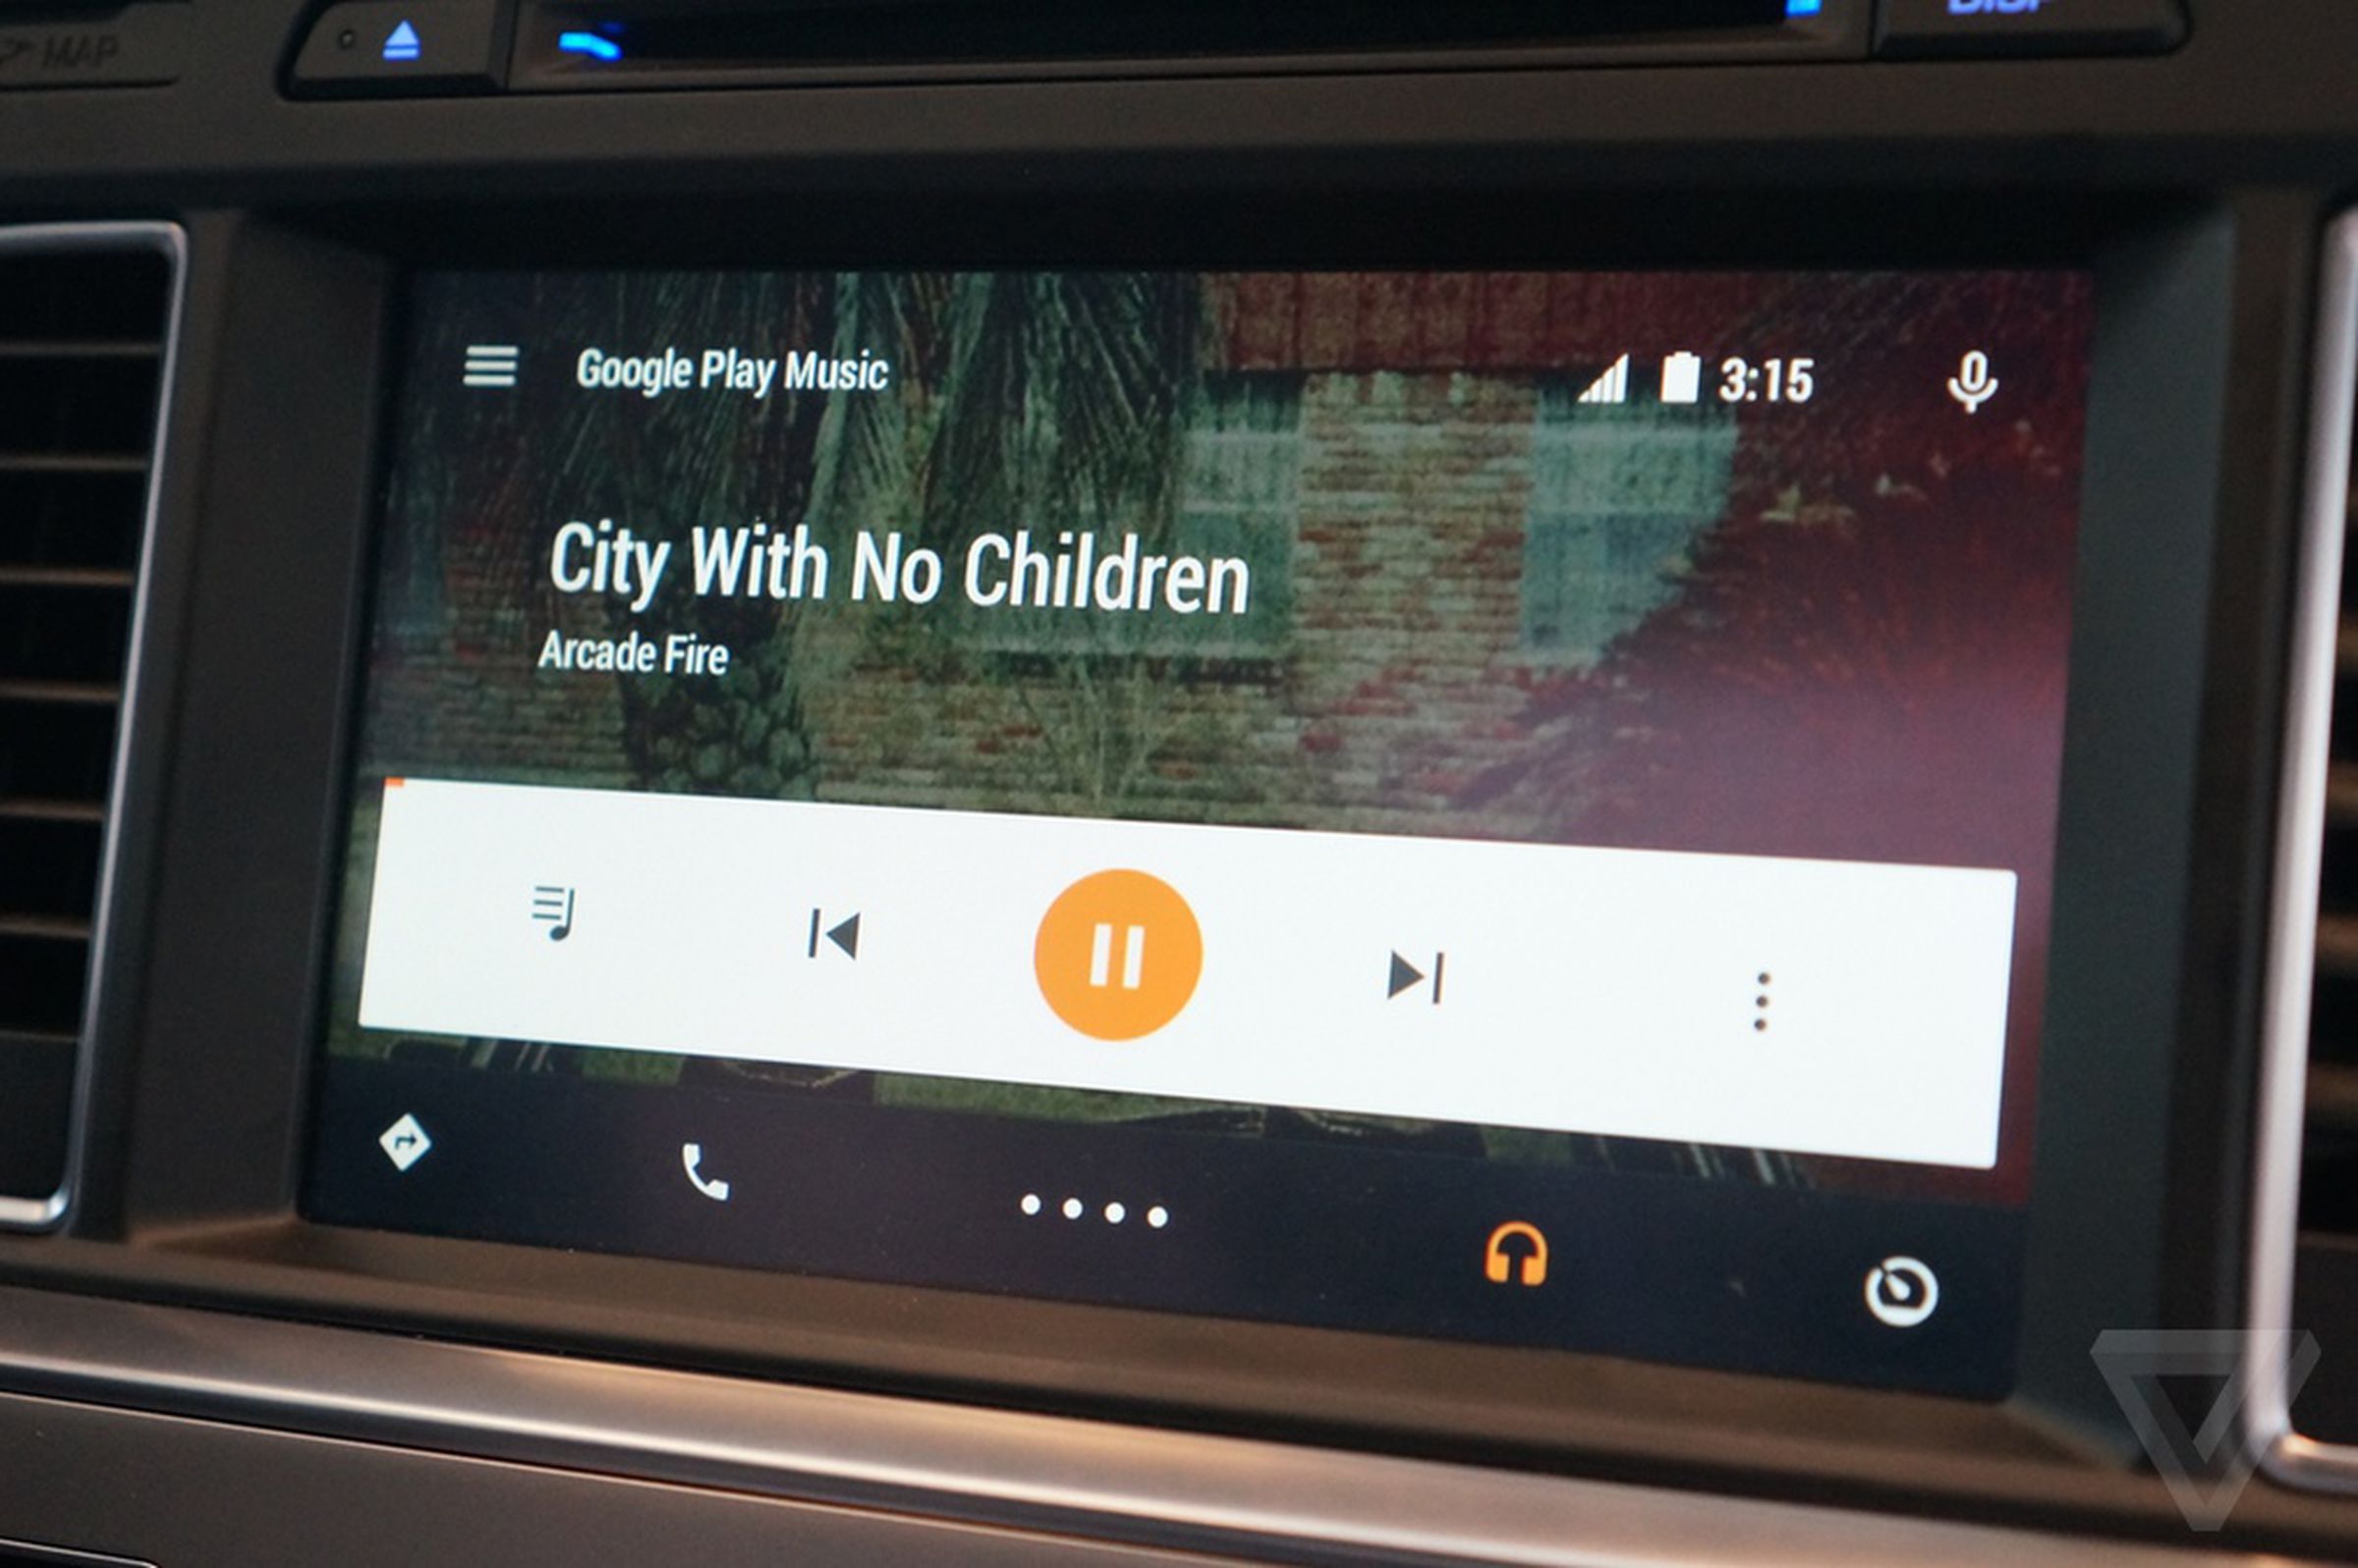 Android Auto pictures